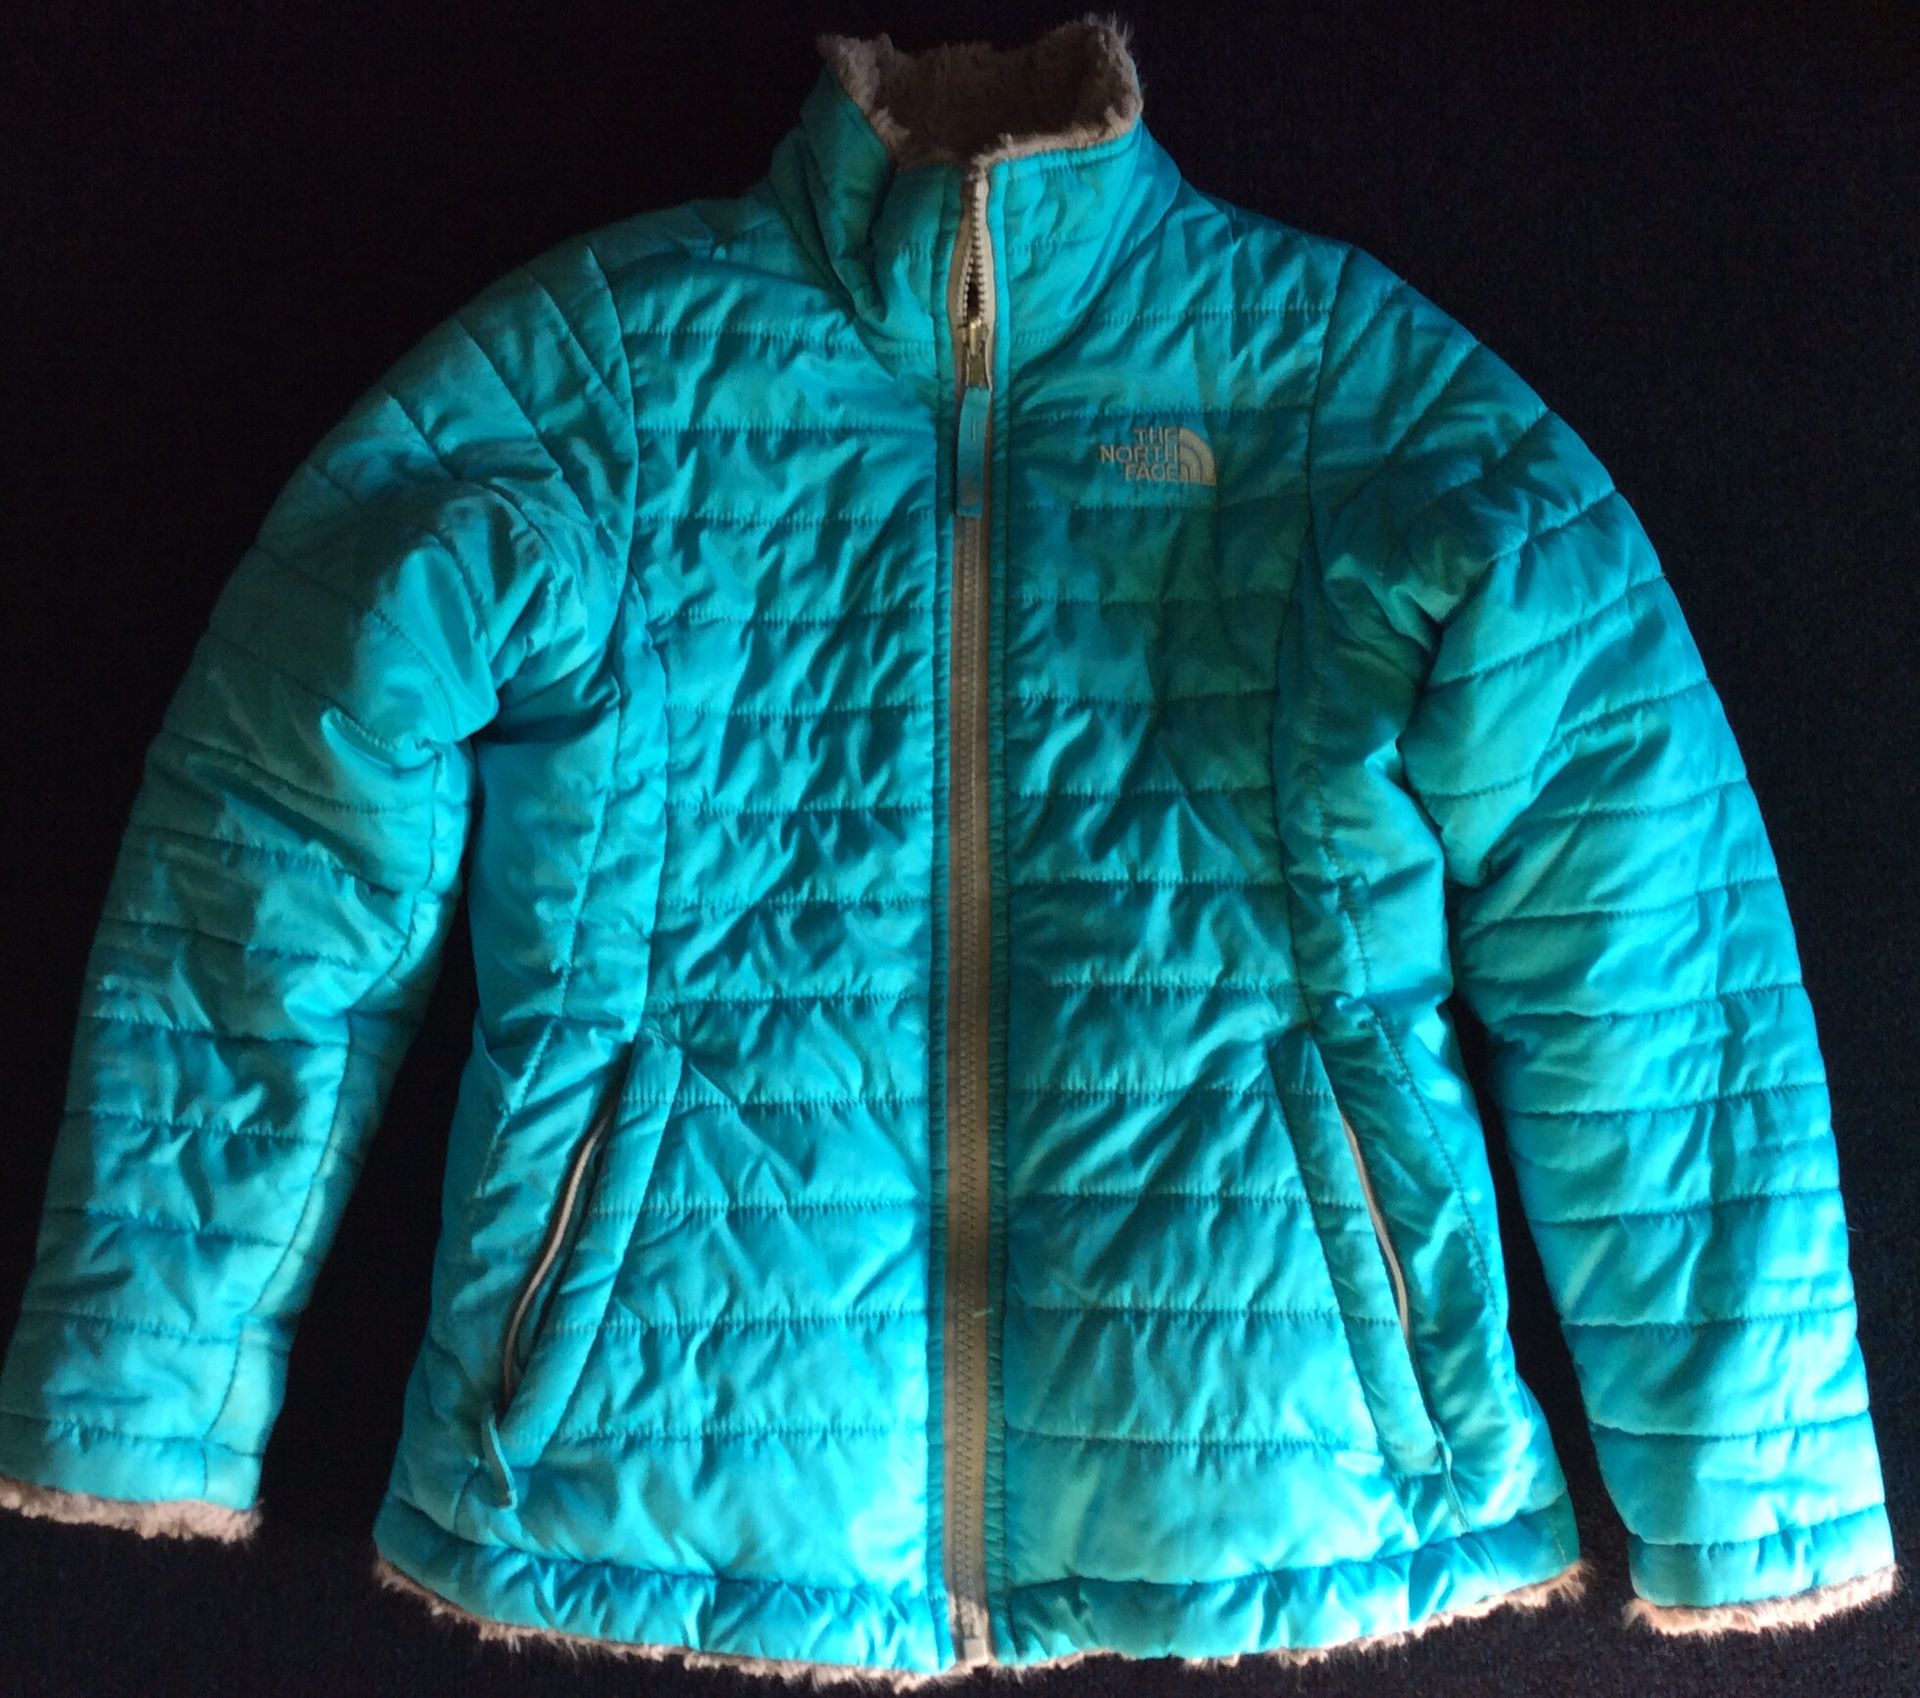 North Face reversible coat-size 10/12 girls